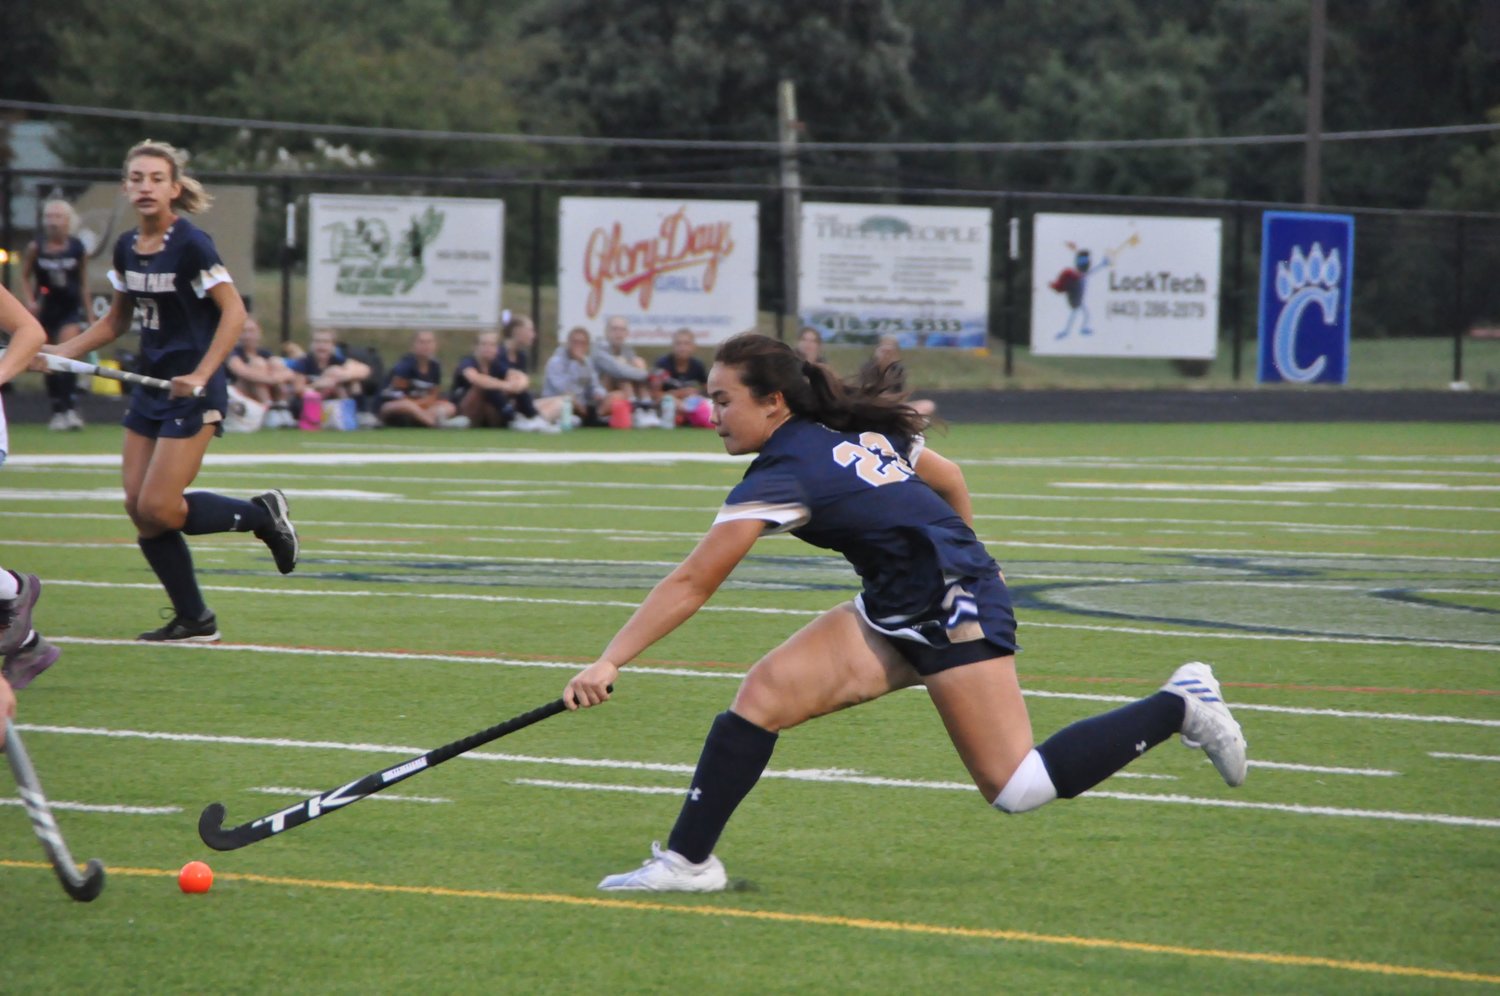 Alyssa Gore-Chung reached for the ball.